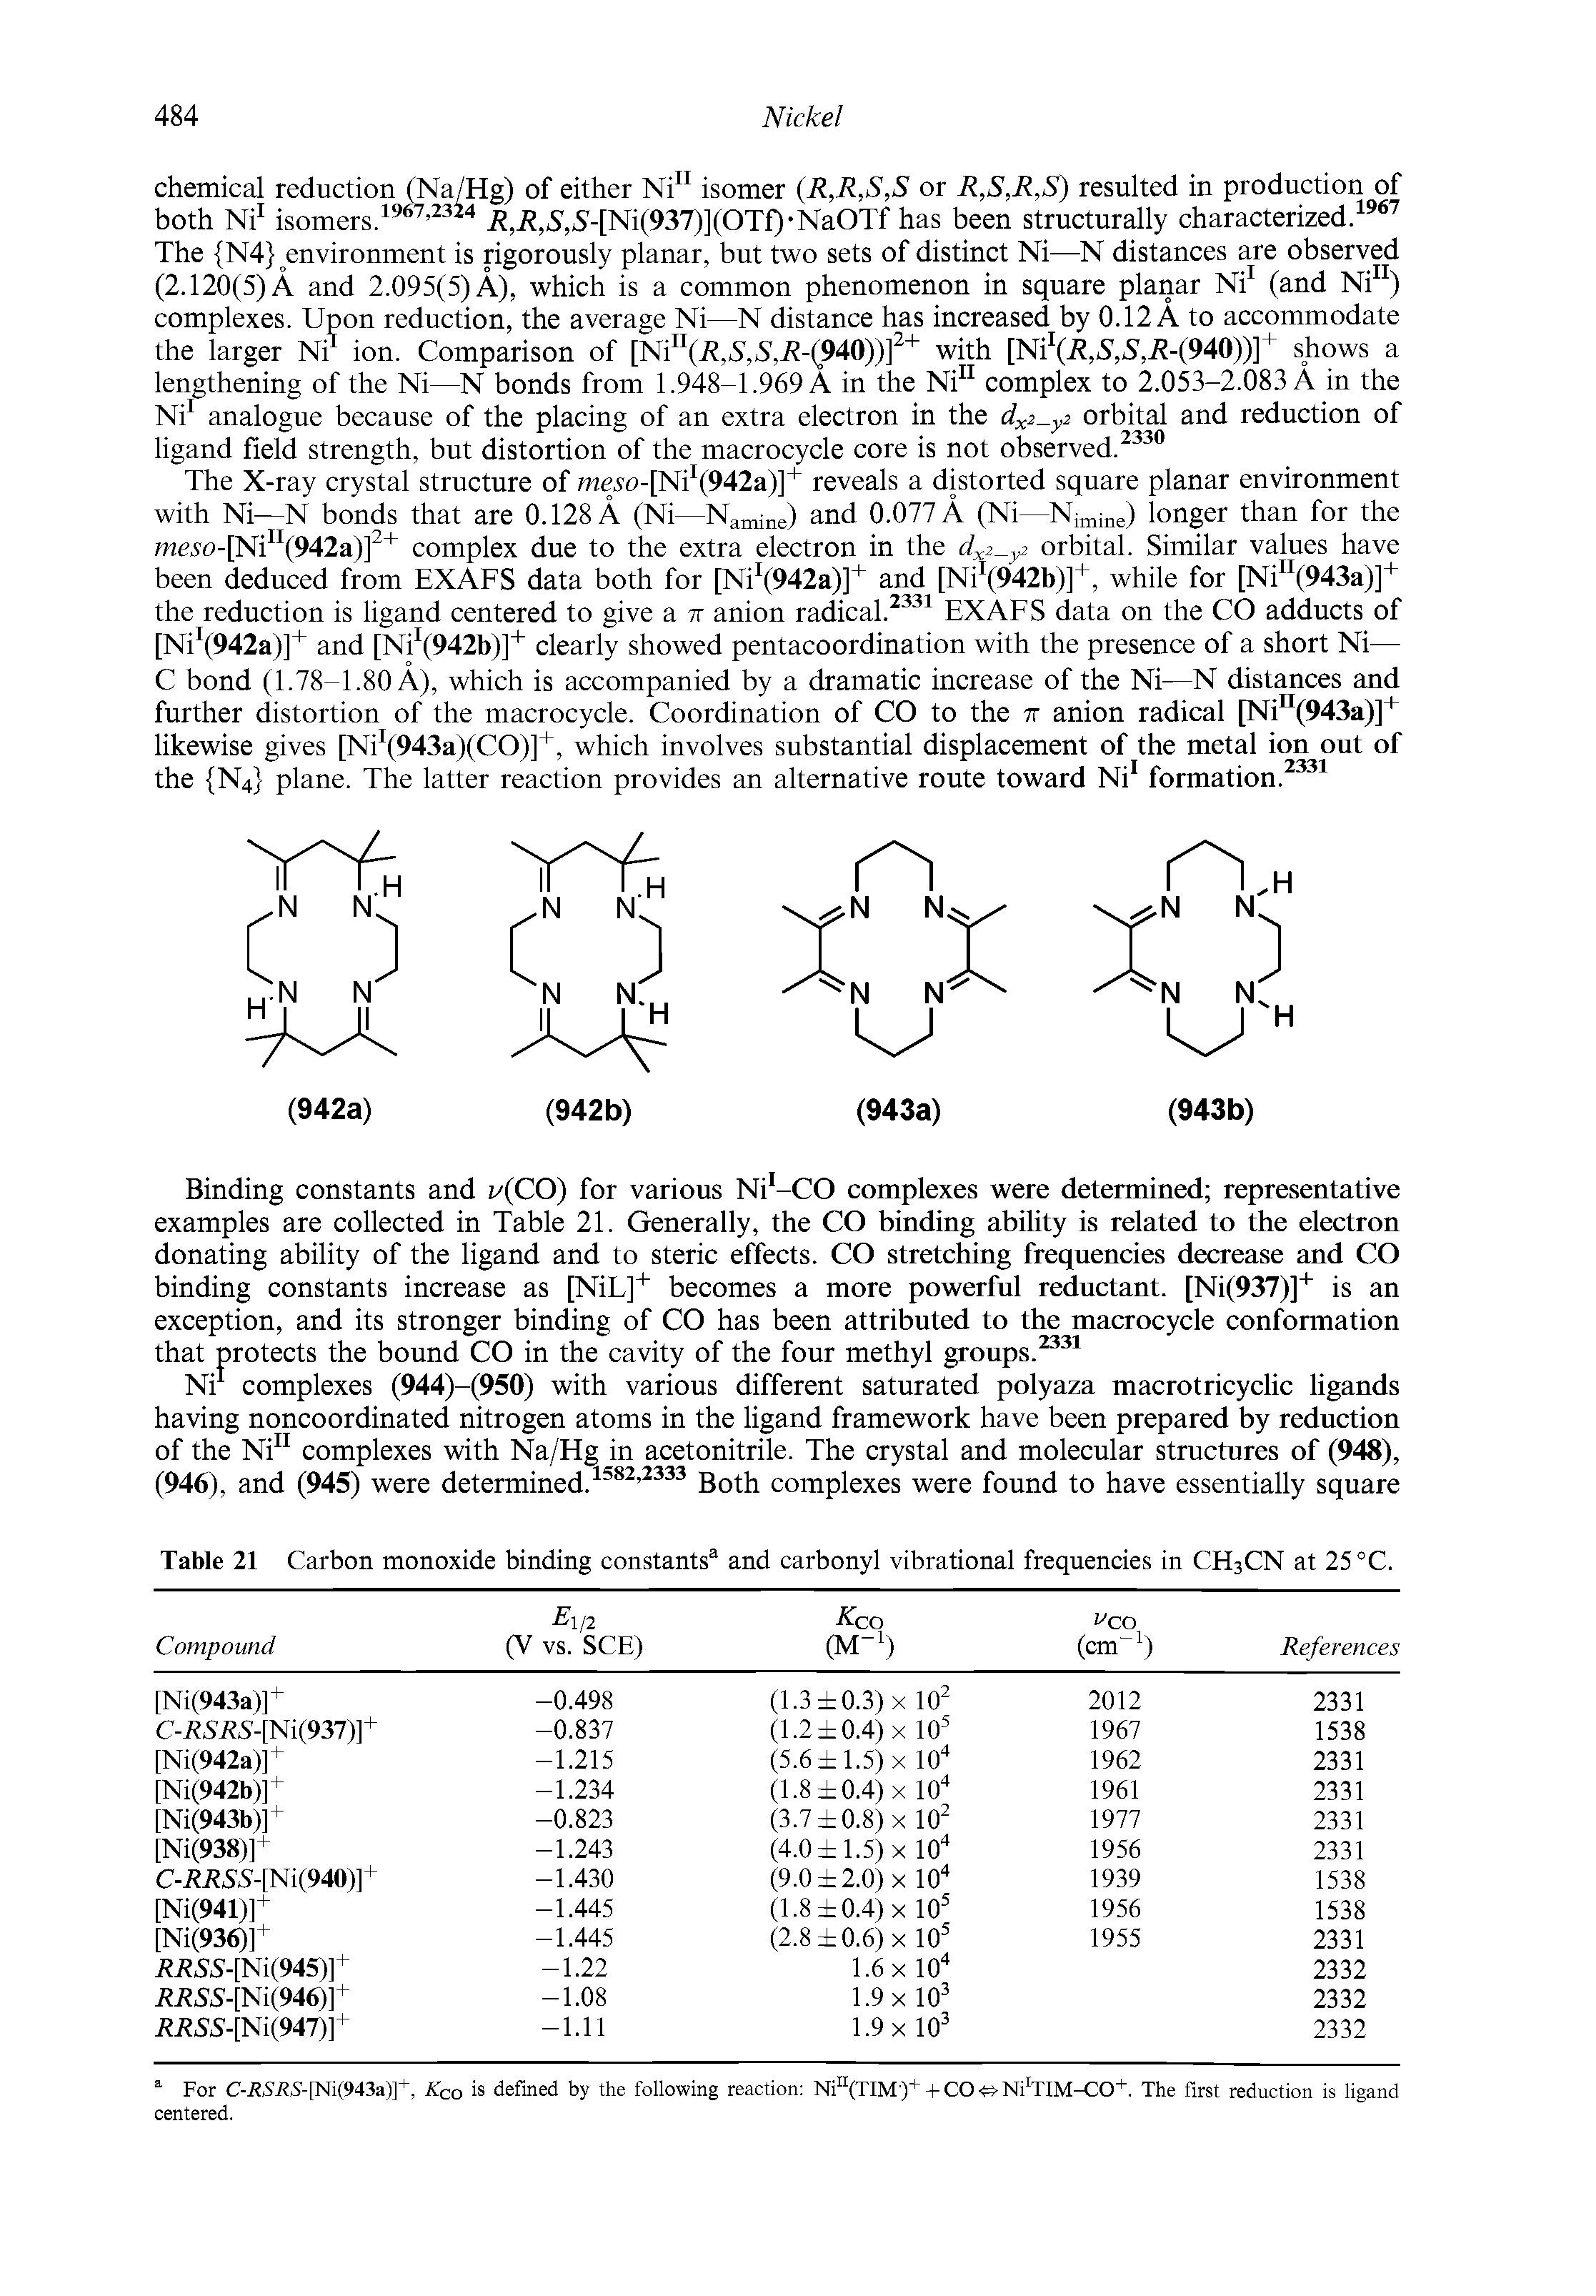 Table 21 Carbon monoxide binding constants3 and carbonyl vibrational frequencies in CH3CN at 25 °C.